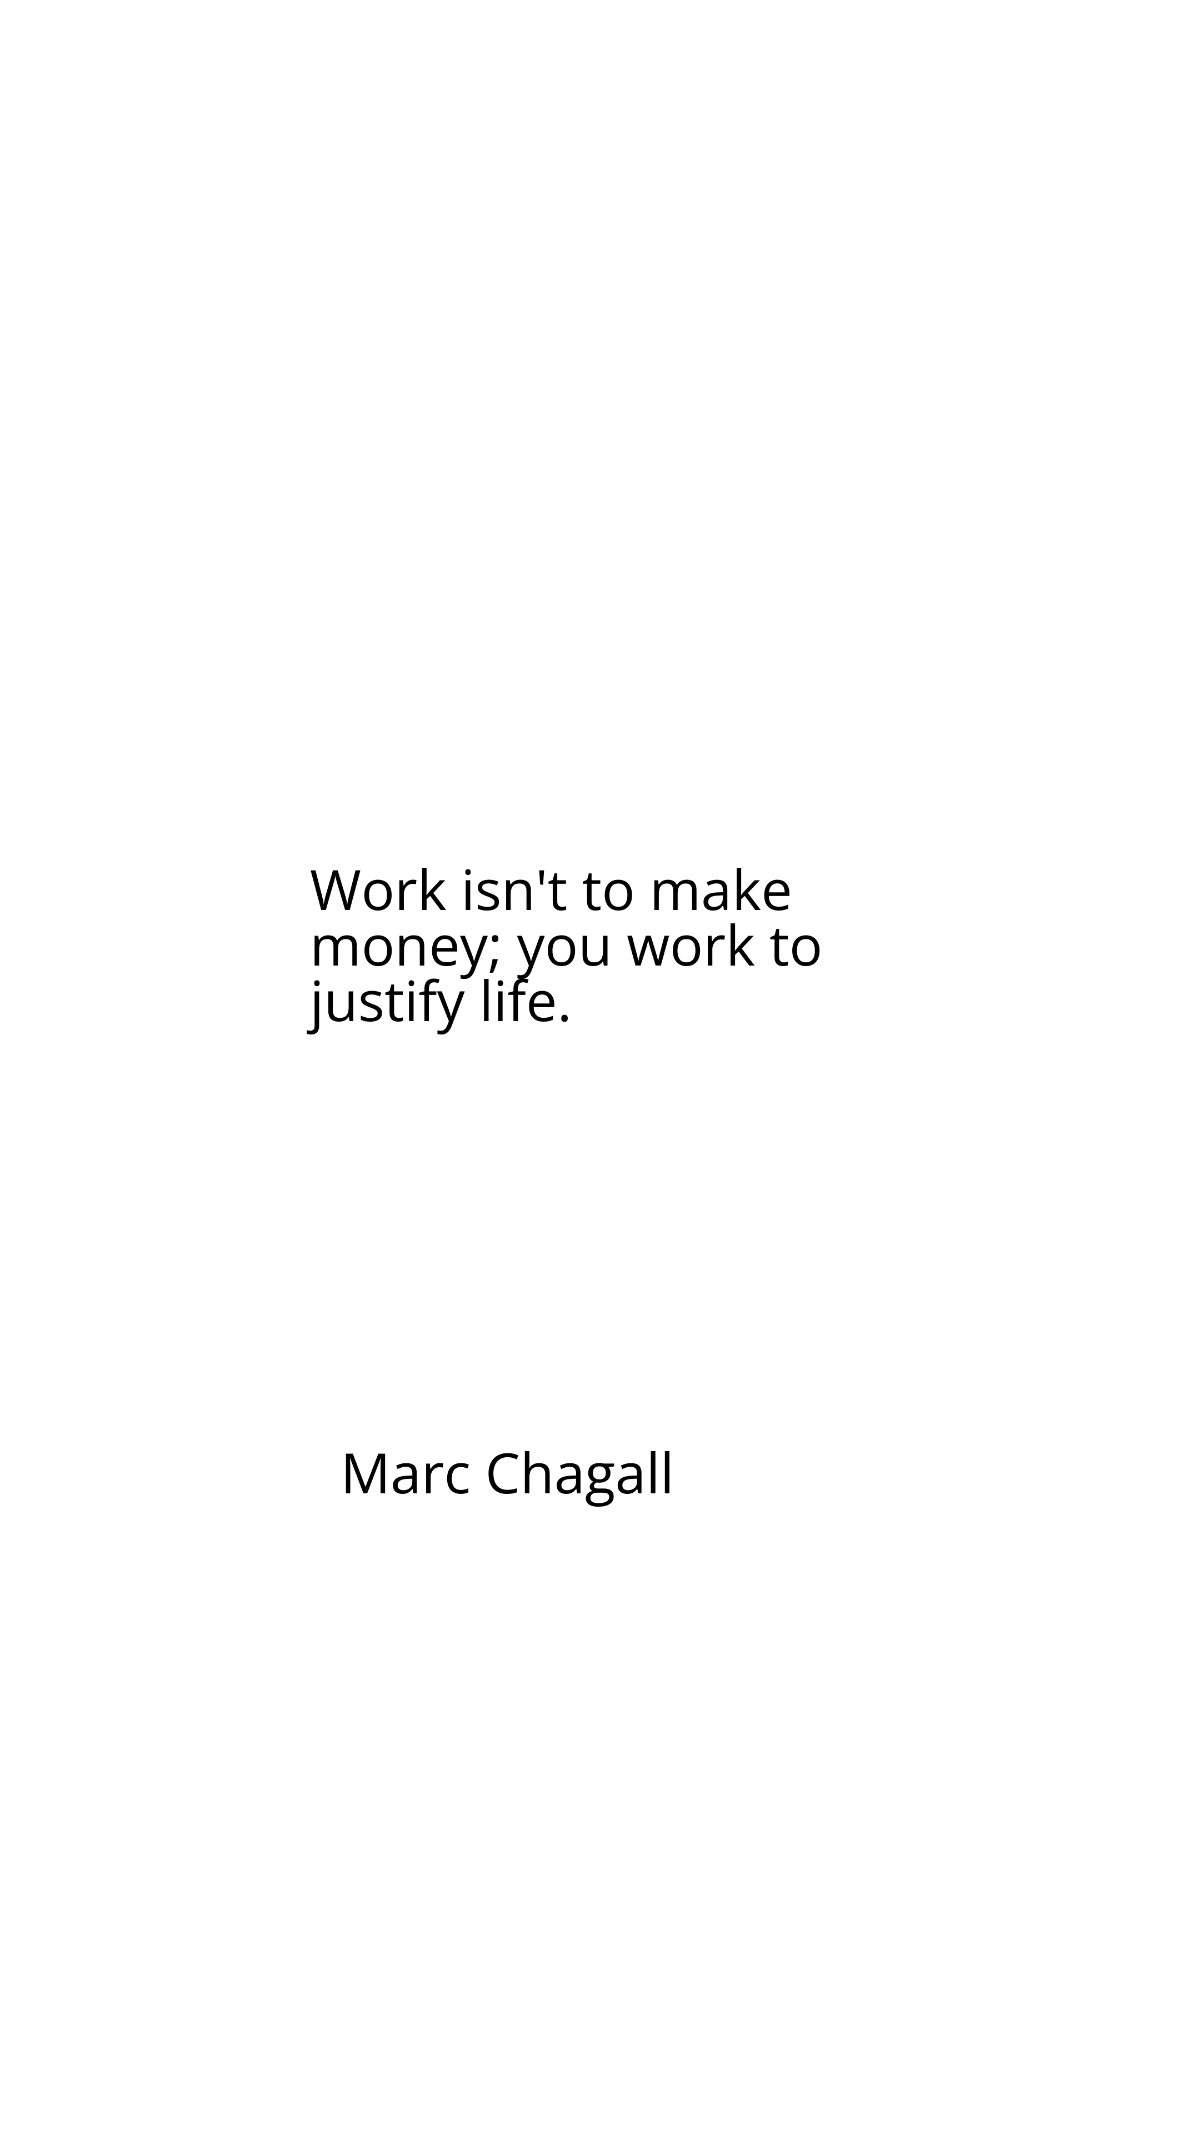 Marc Chagall - Work isn't to make money; you work to justify life.